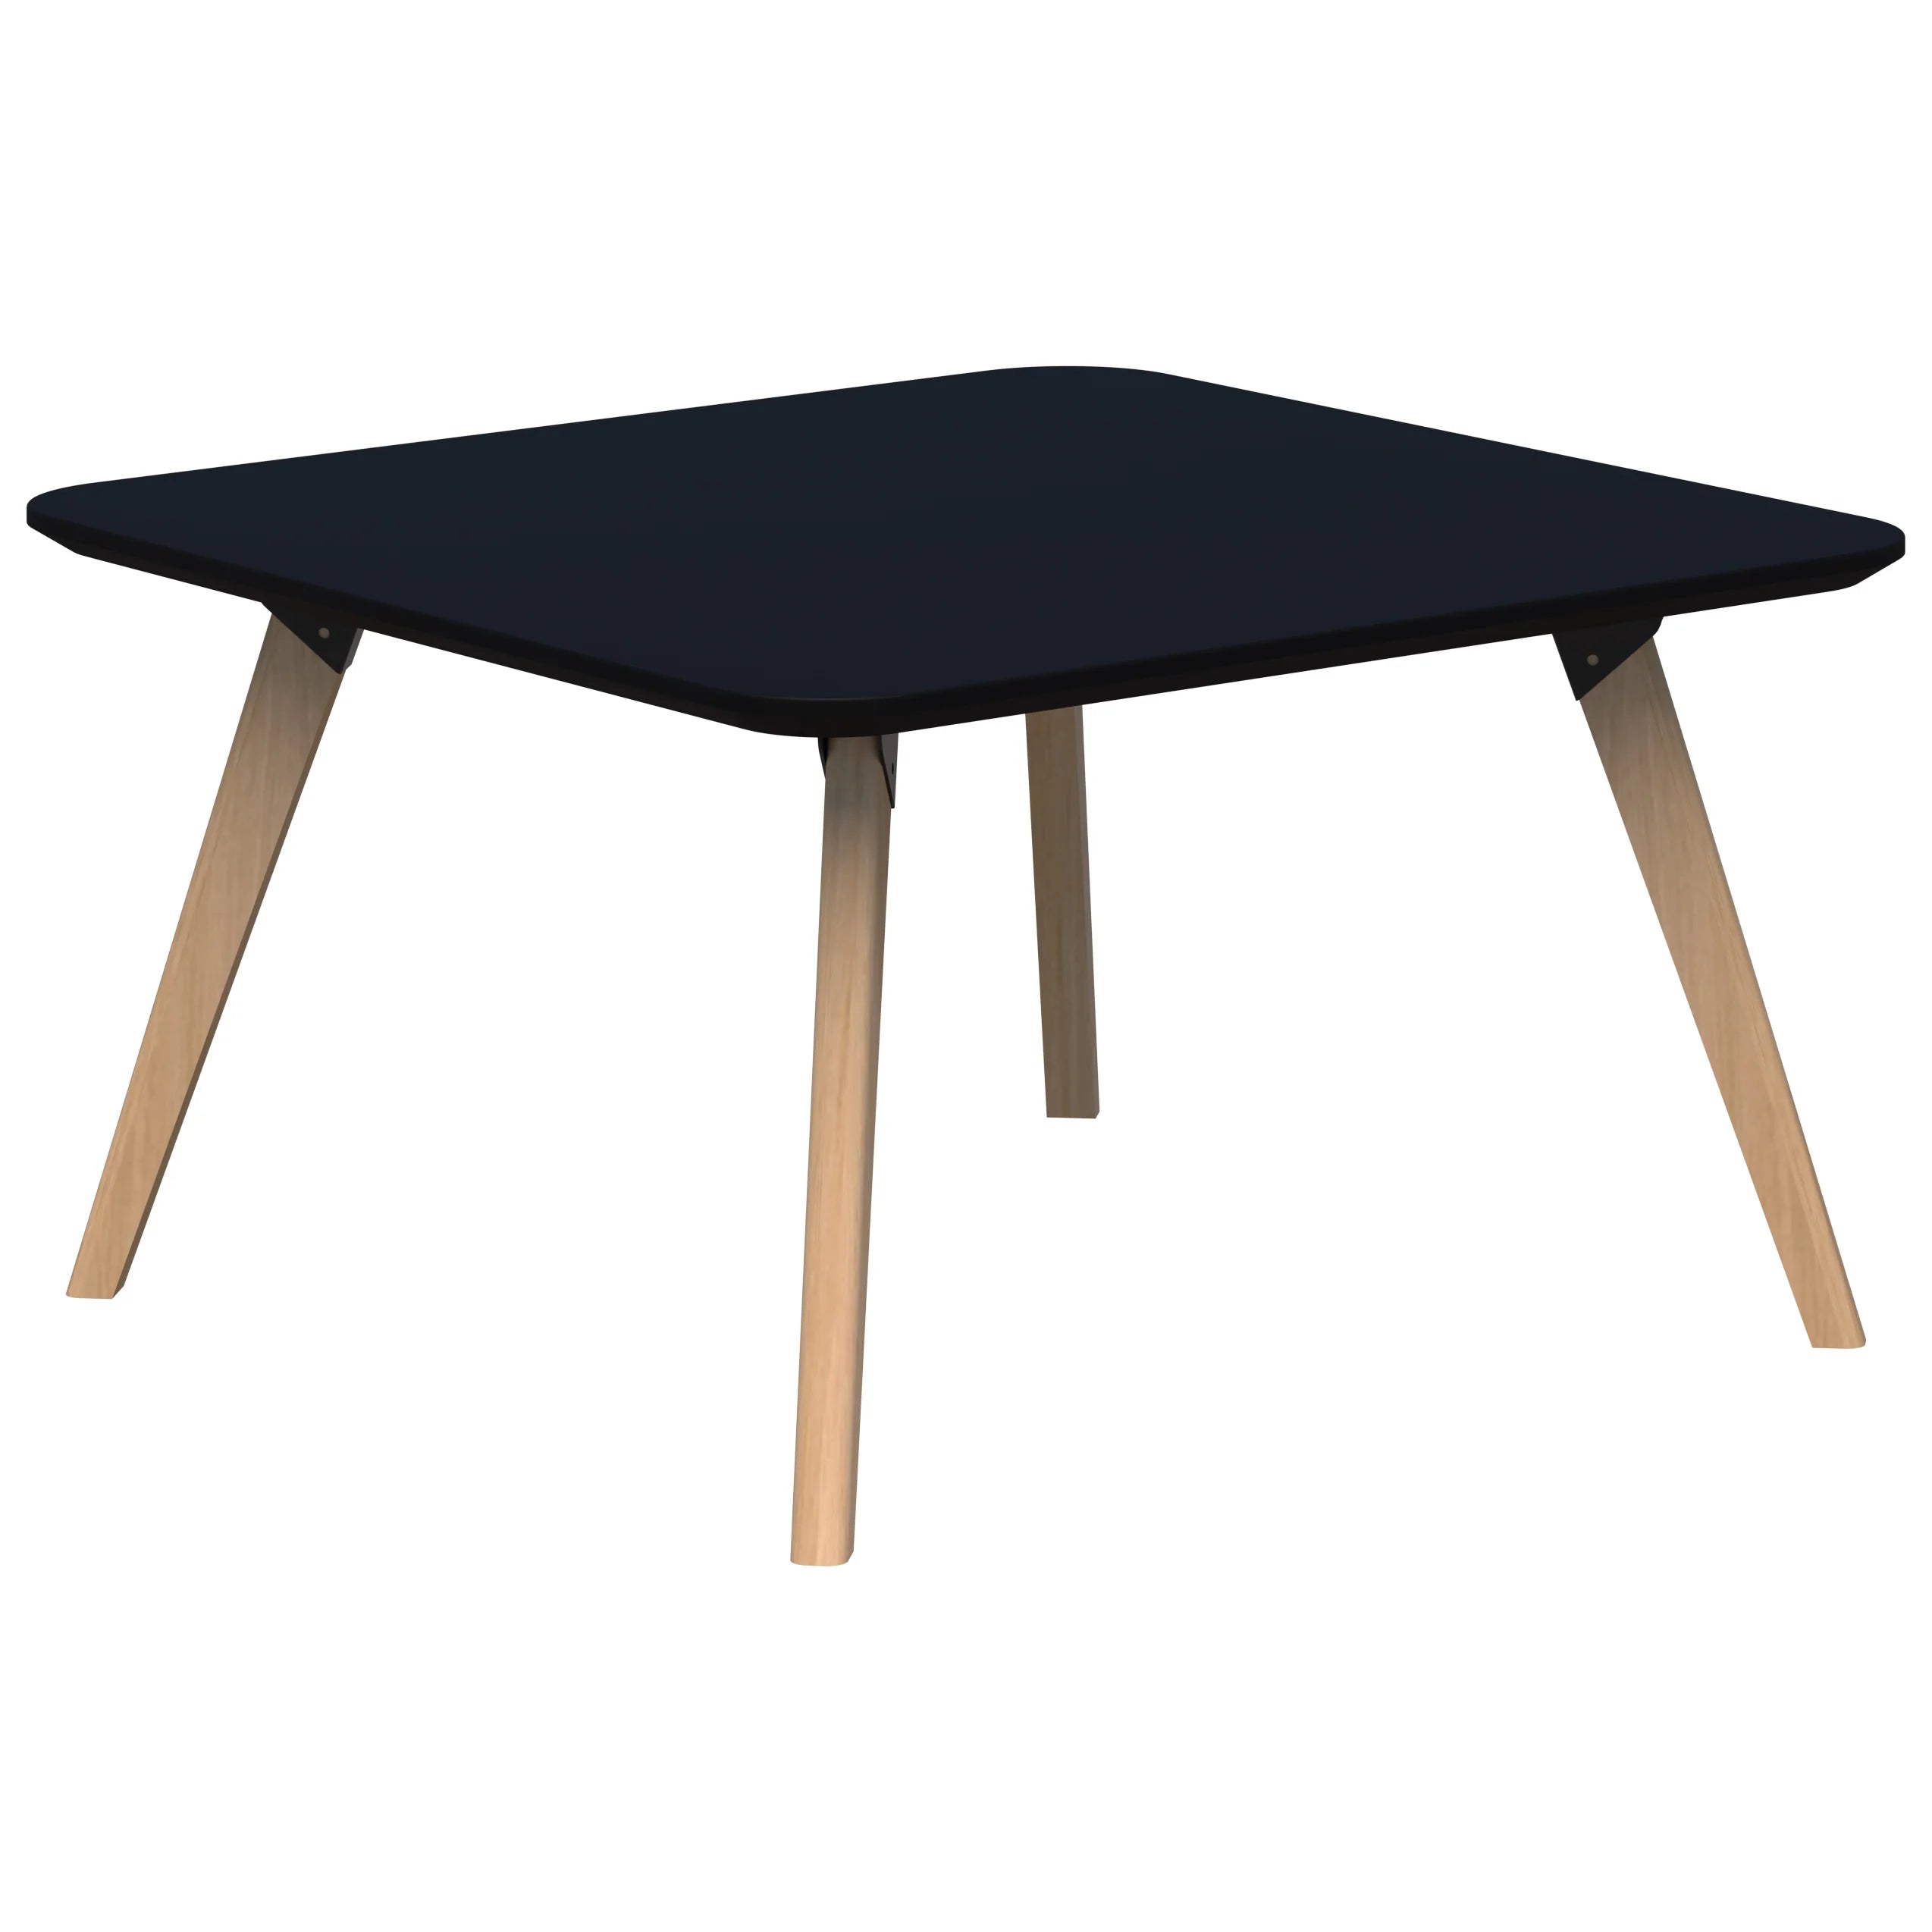 Oslo square coffee table with ash timber frame and black velvet soft matt top.